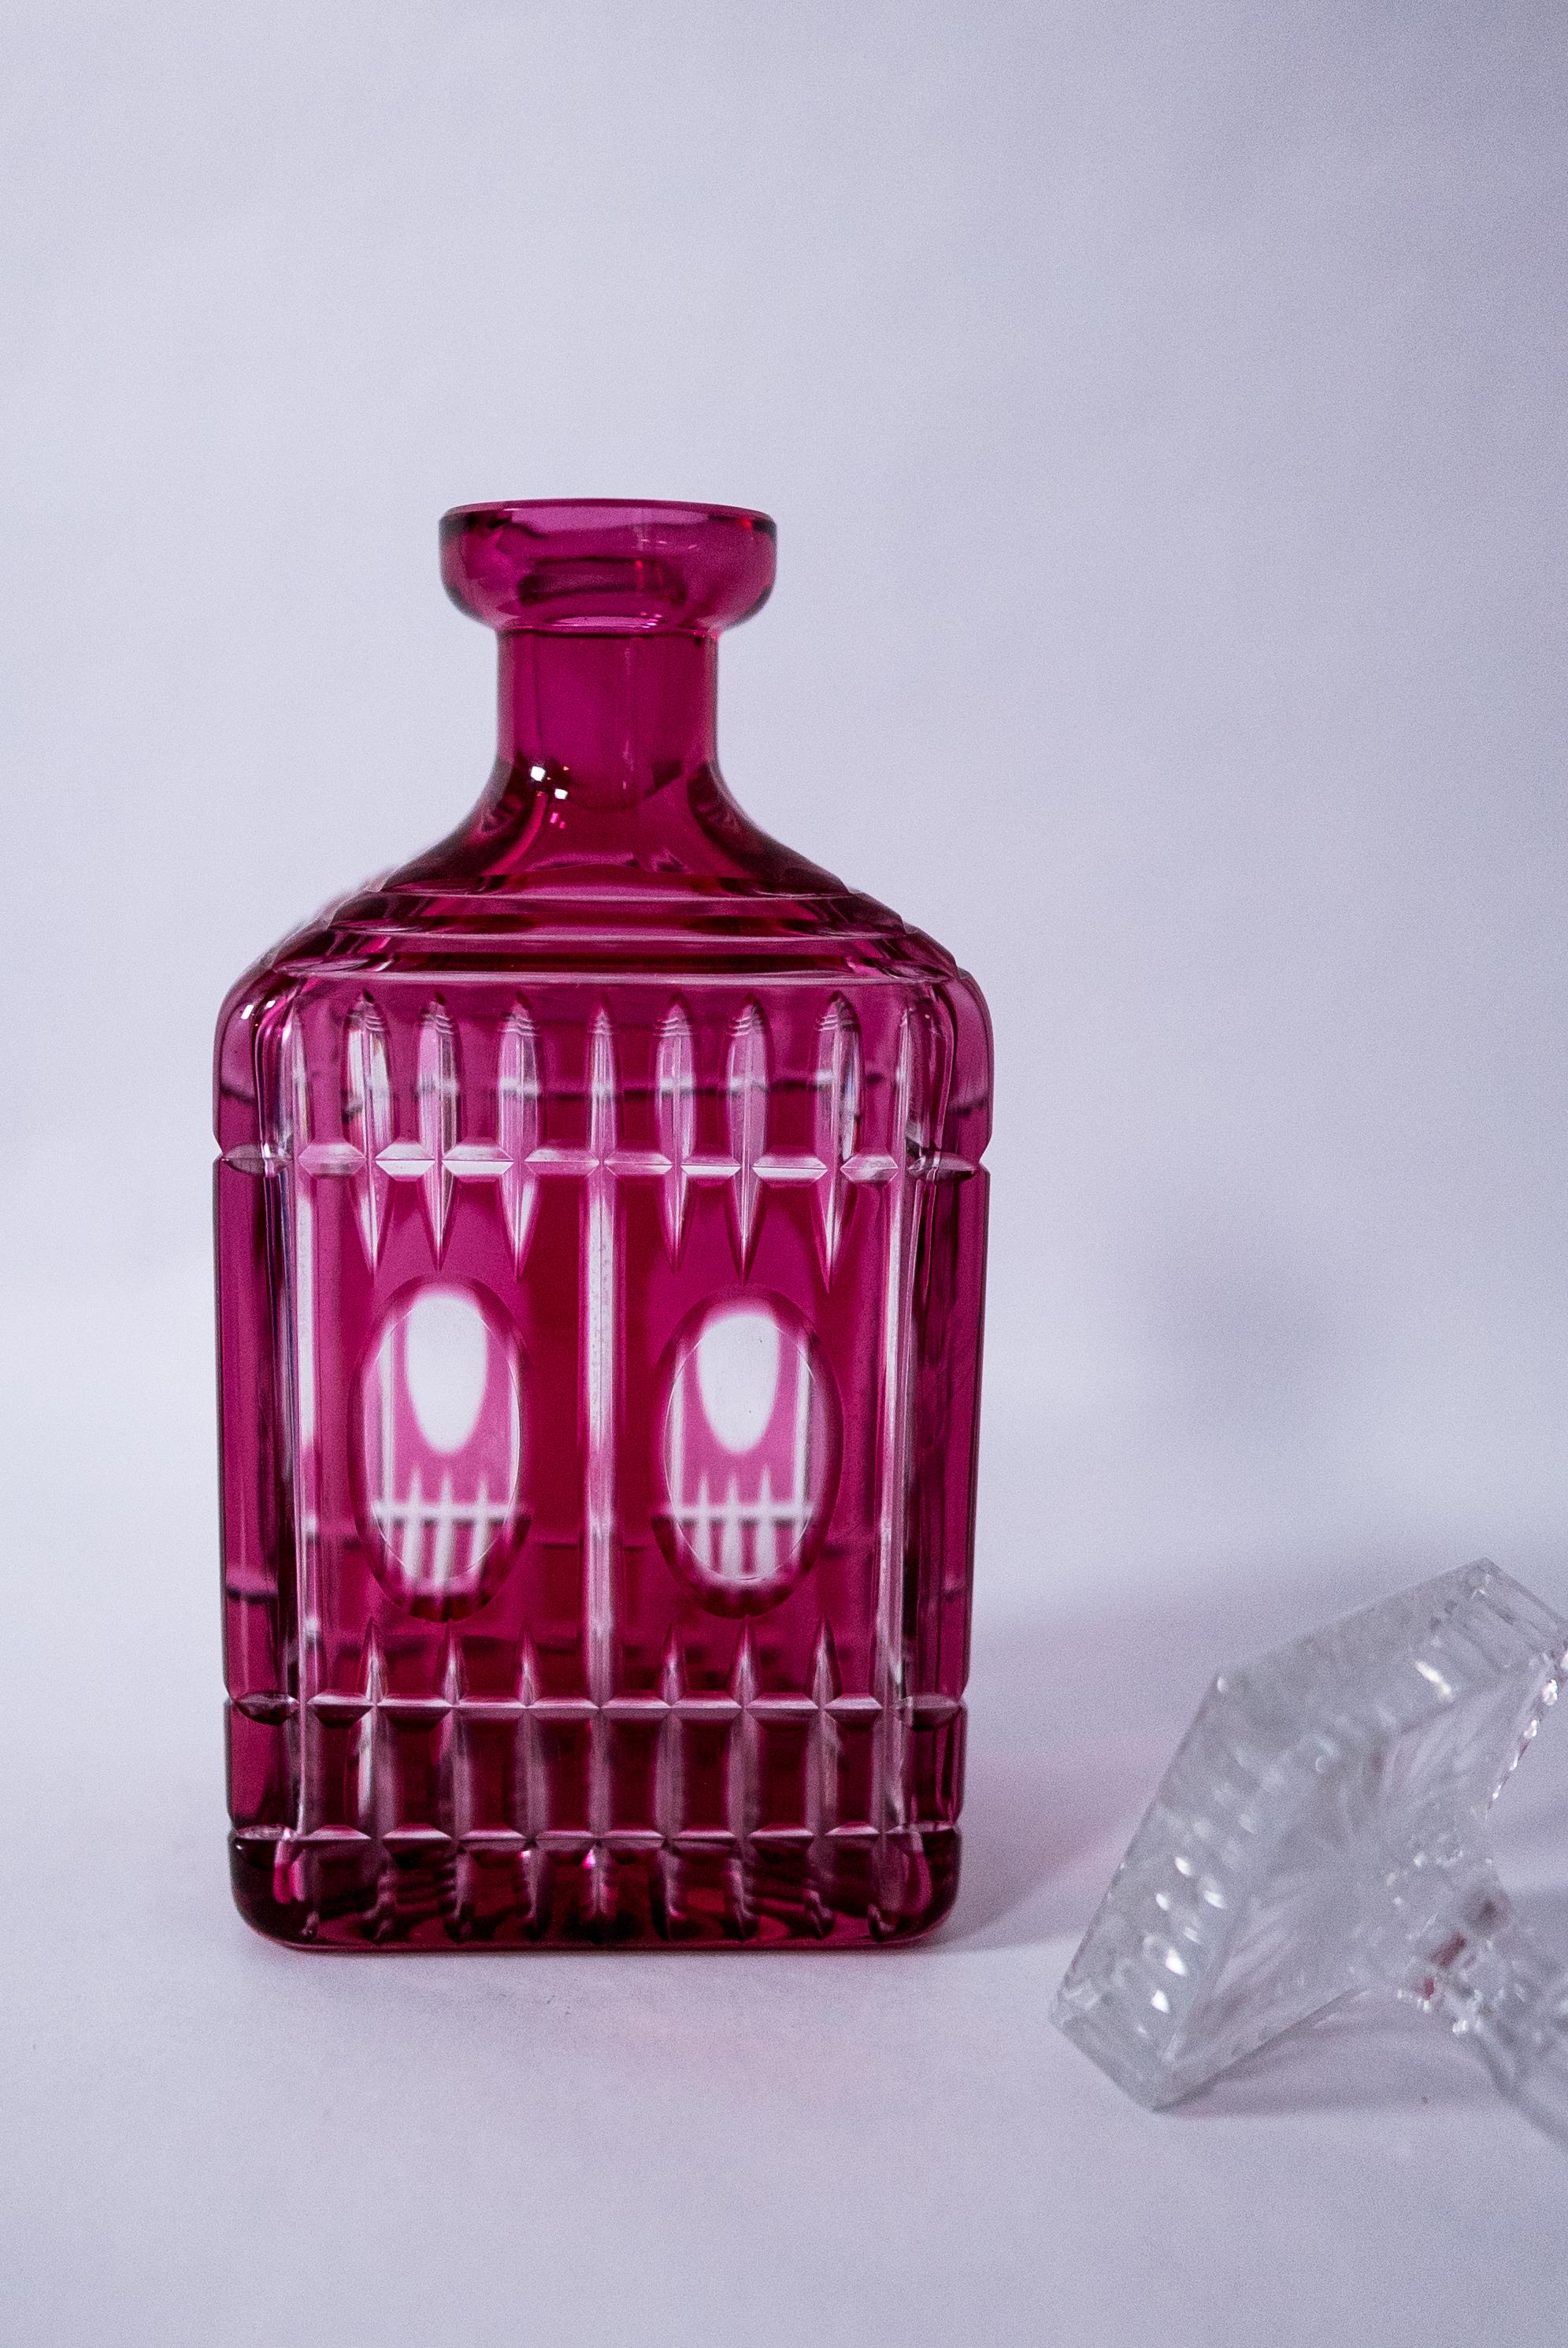 Late Victorian Antique English Cut Crystal Decanter, Ruby Red Color Square Stopper